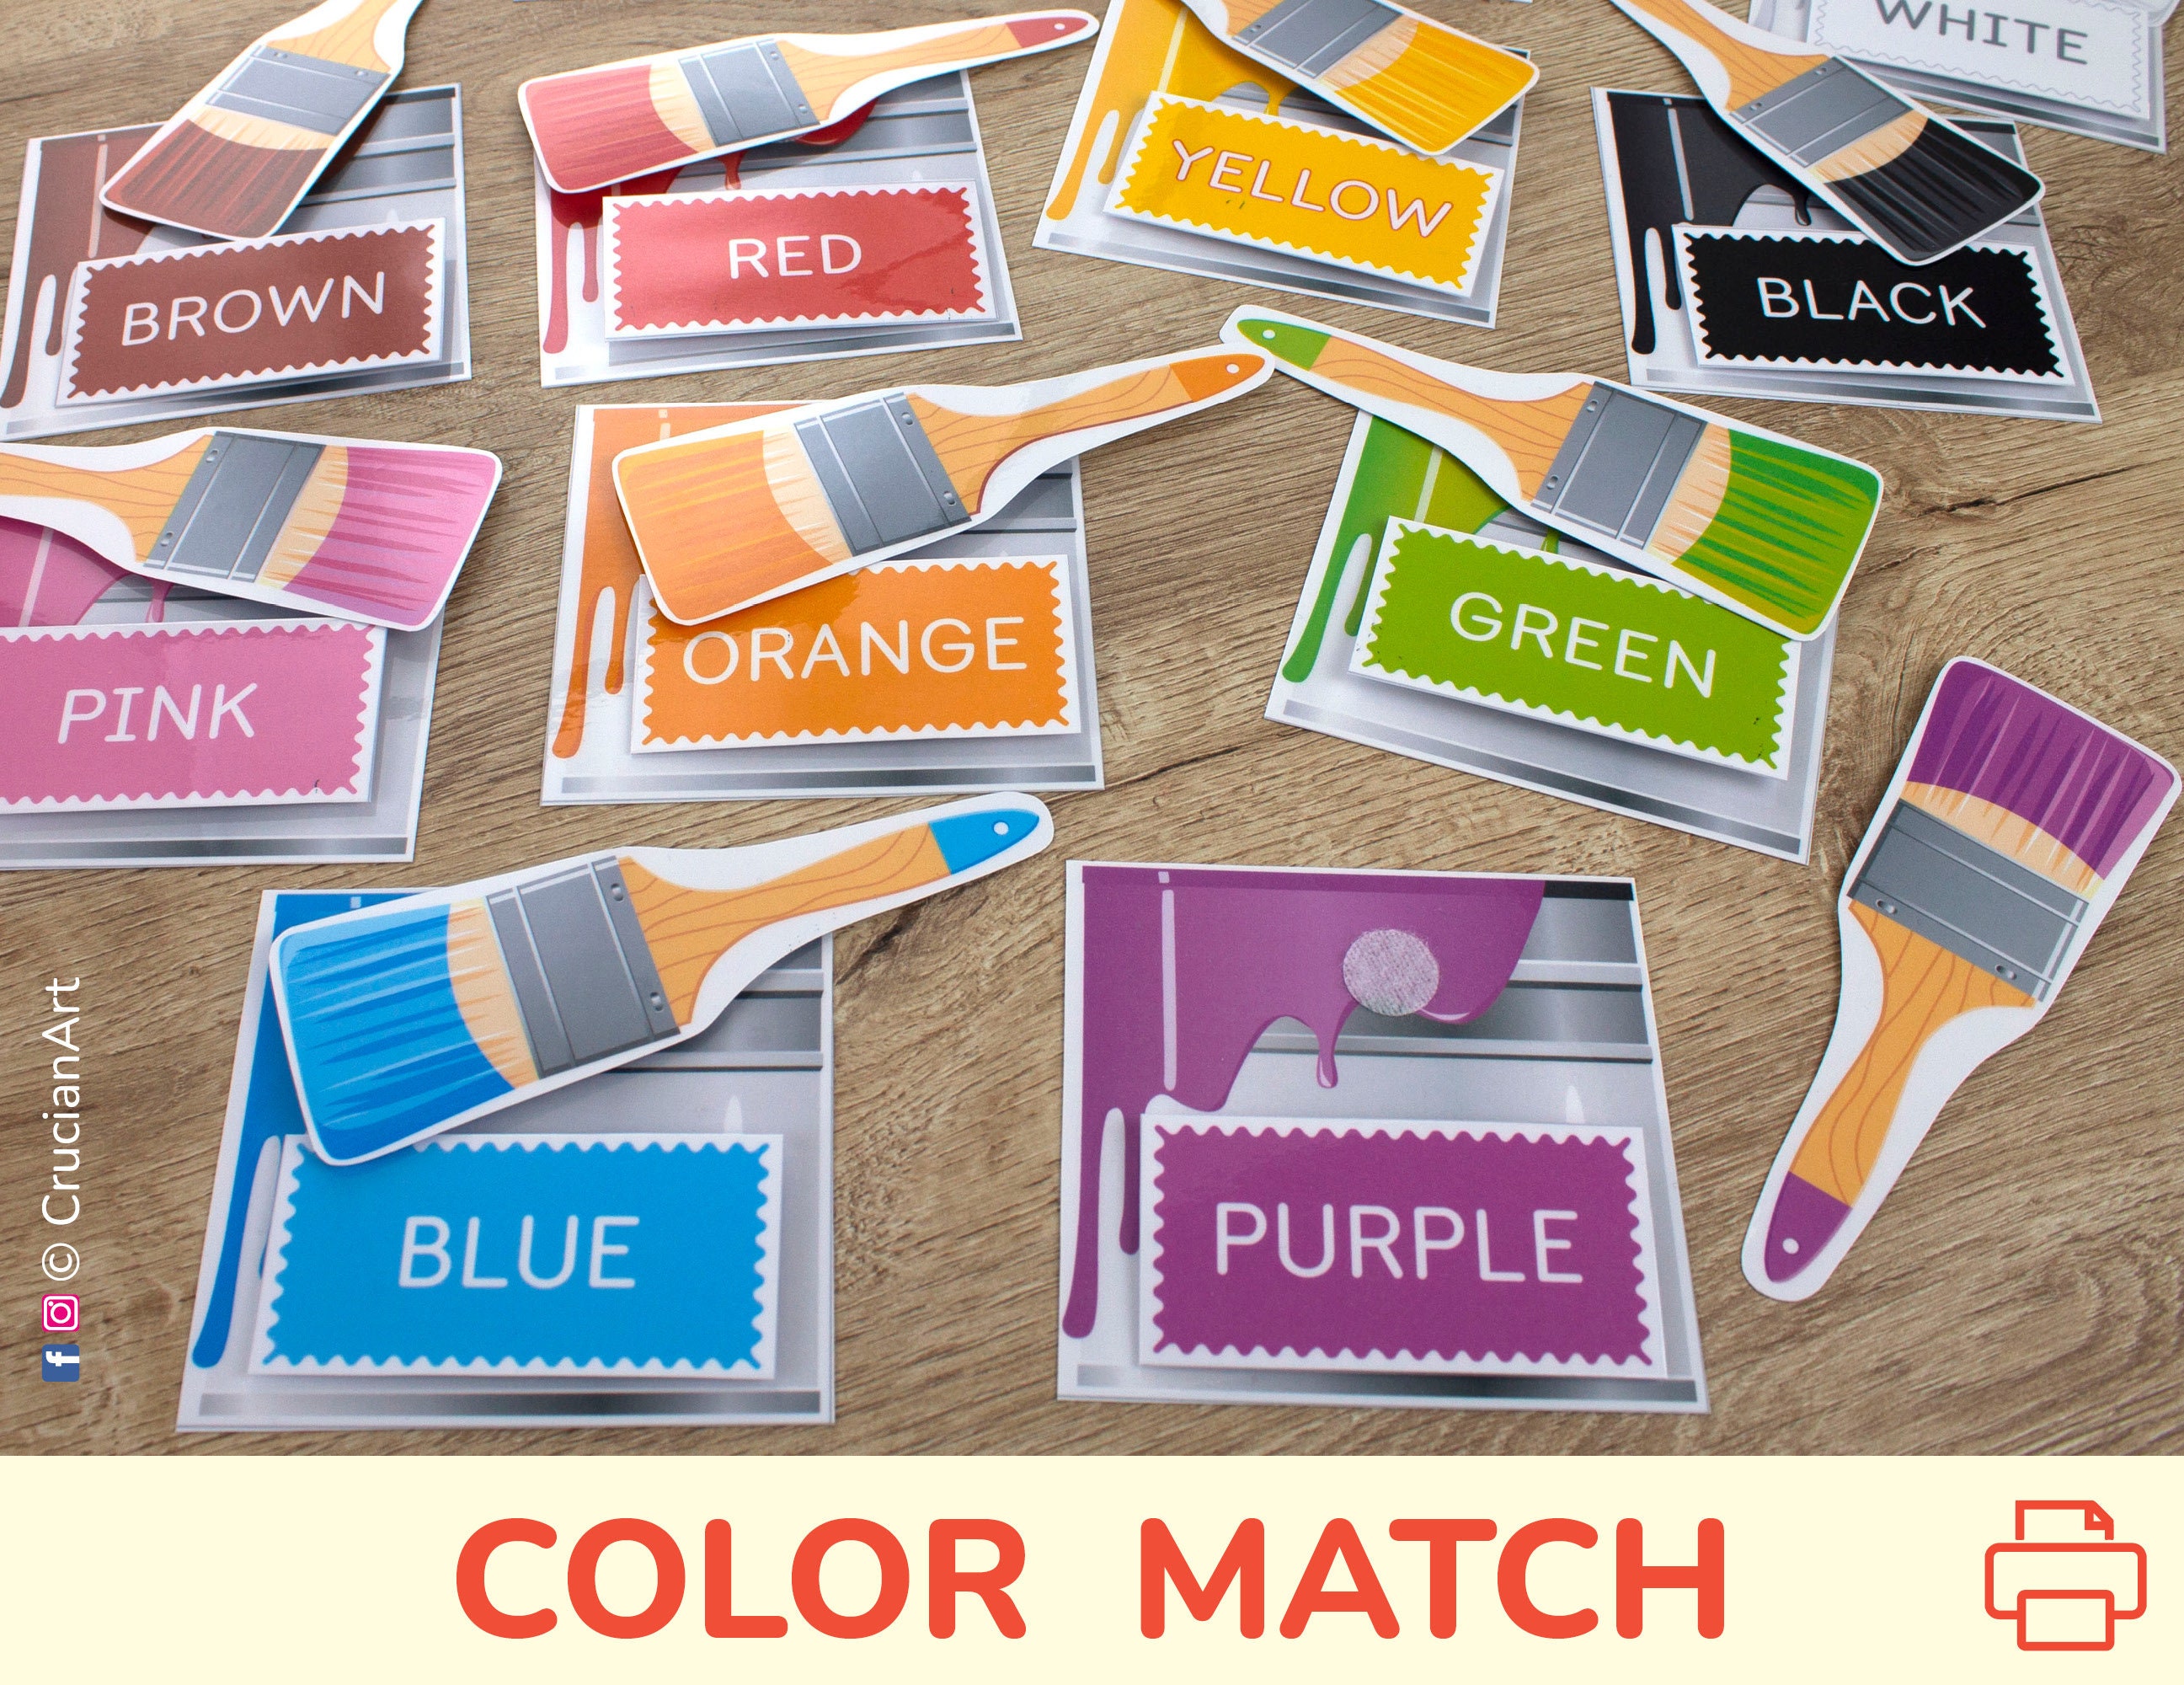 Paint Cans Colors Matching and Labeling Activity. Toddler and Preschool  Printable Color Match Learning 